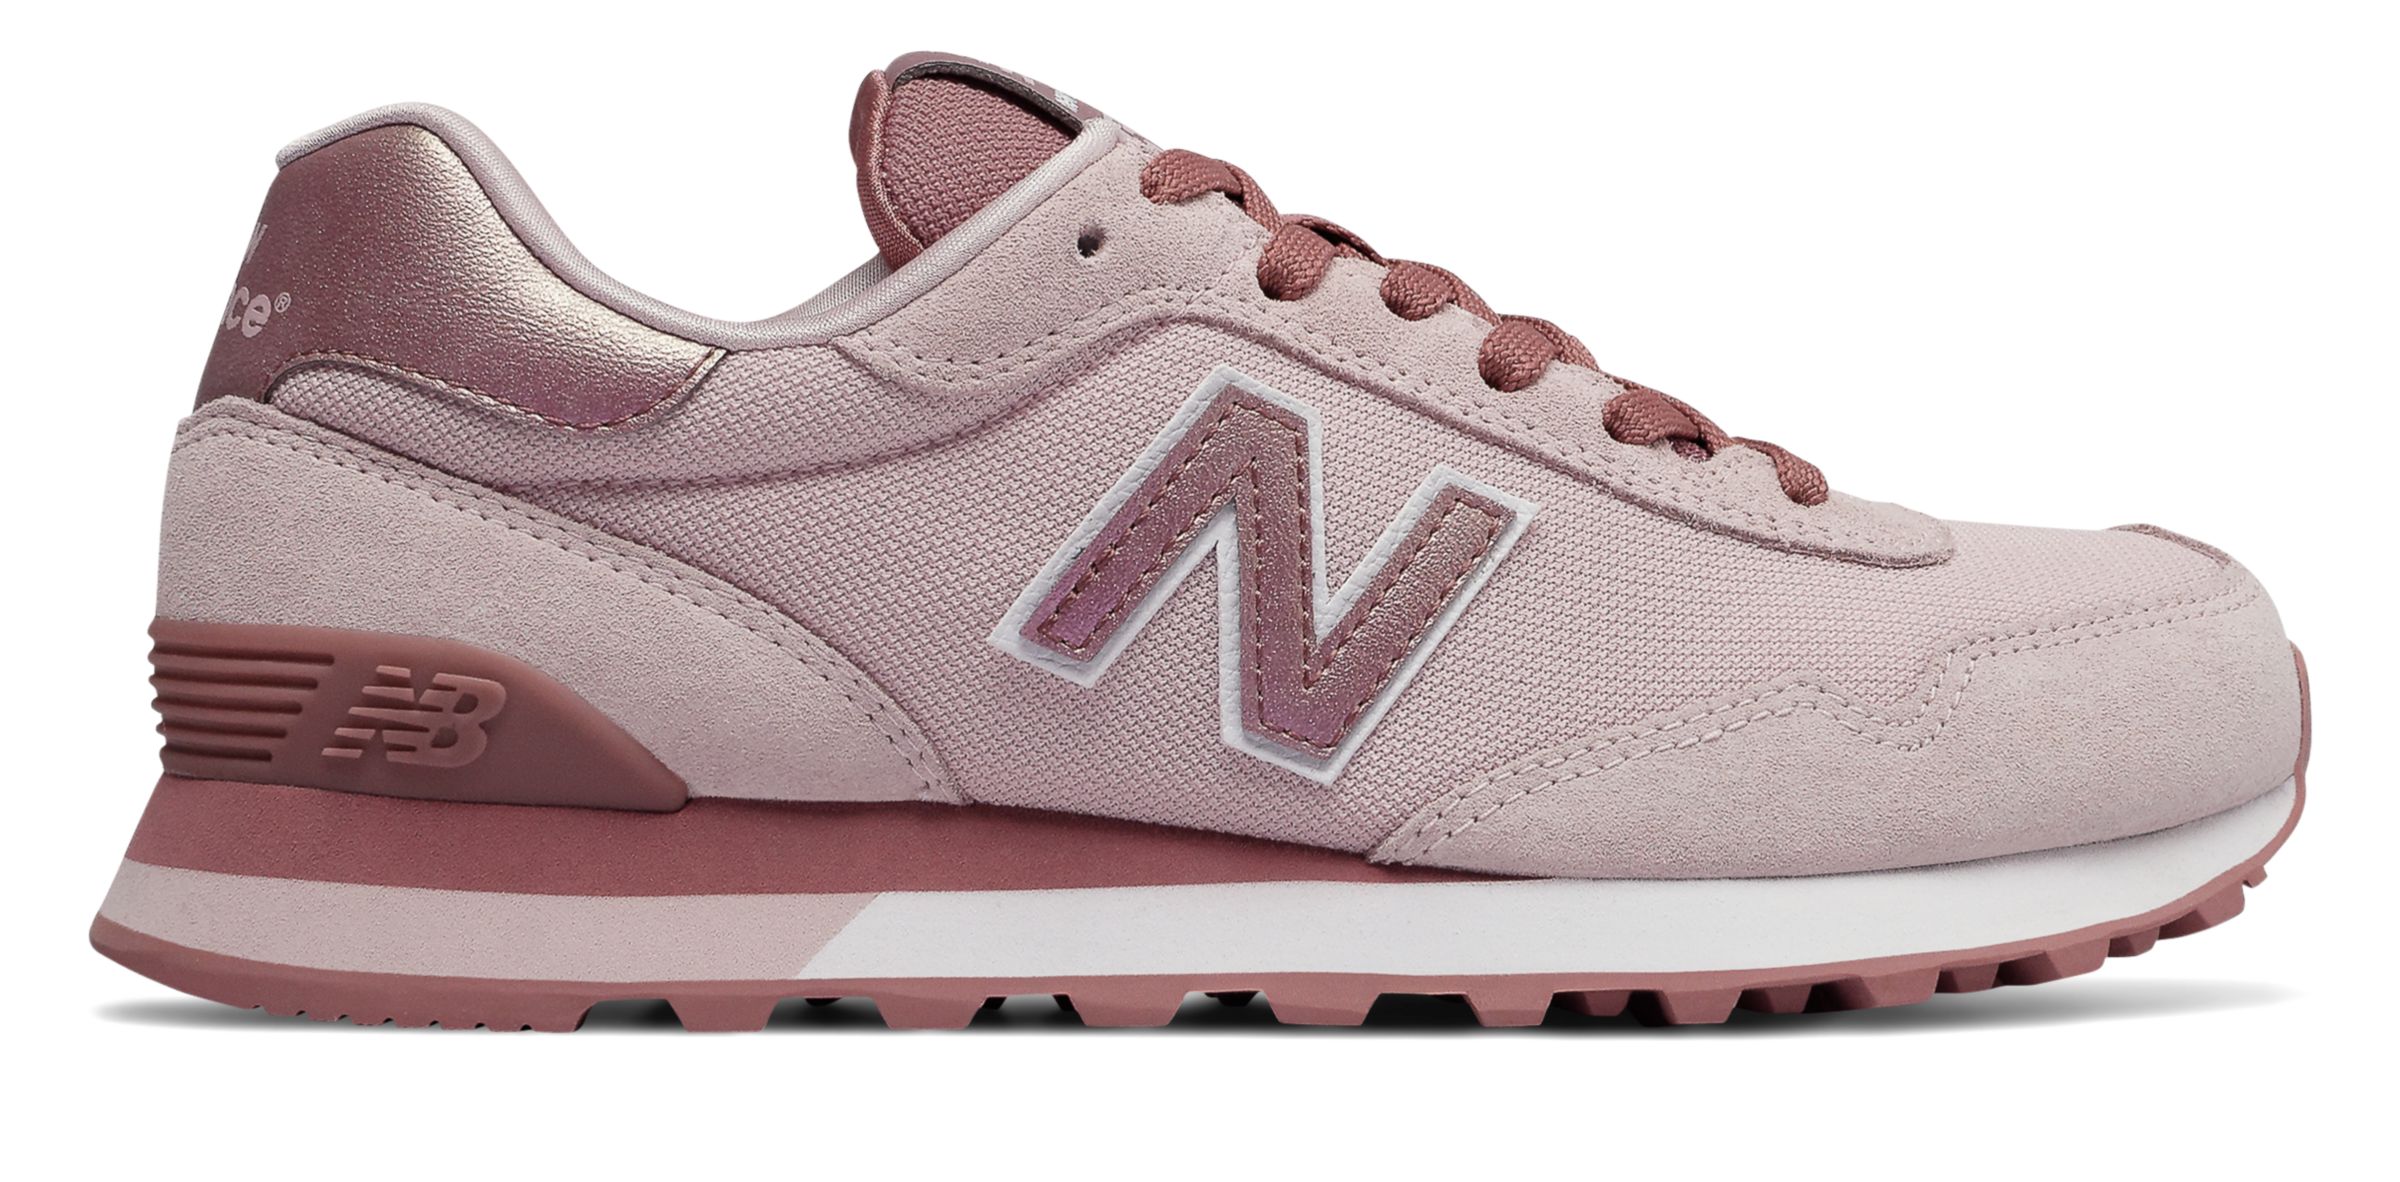 New Balance WL515 on Sale - Discounts Up to 20% Off on WL515CSC at Joe's New  Balance Outlet